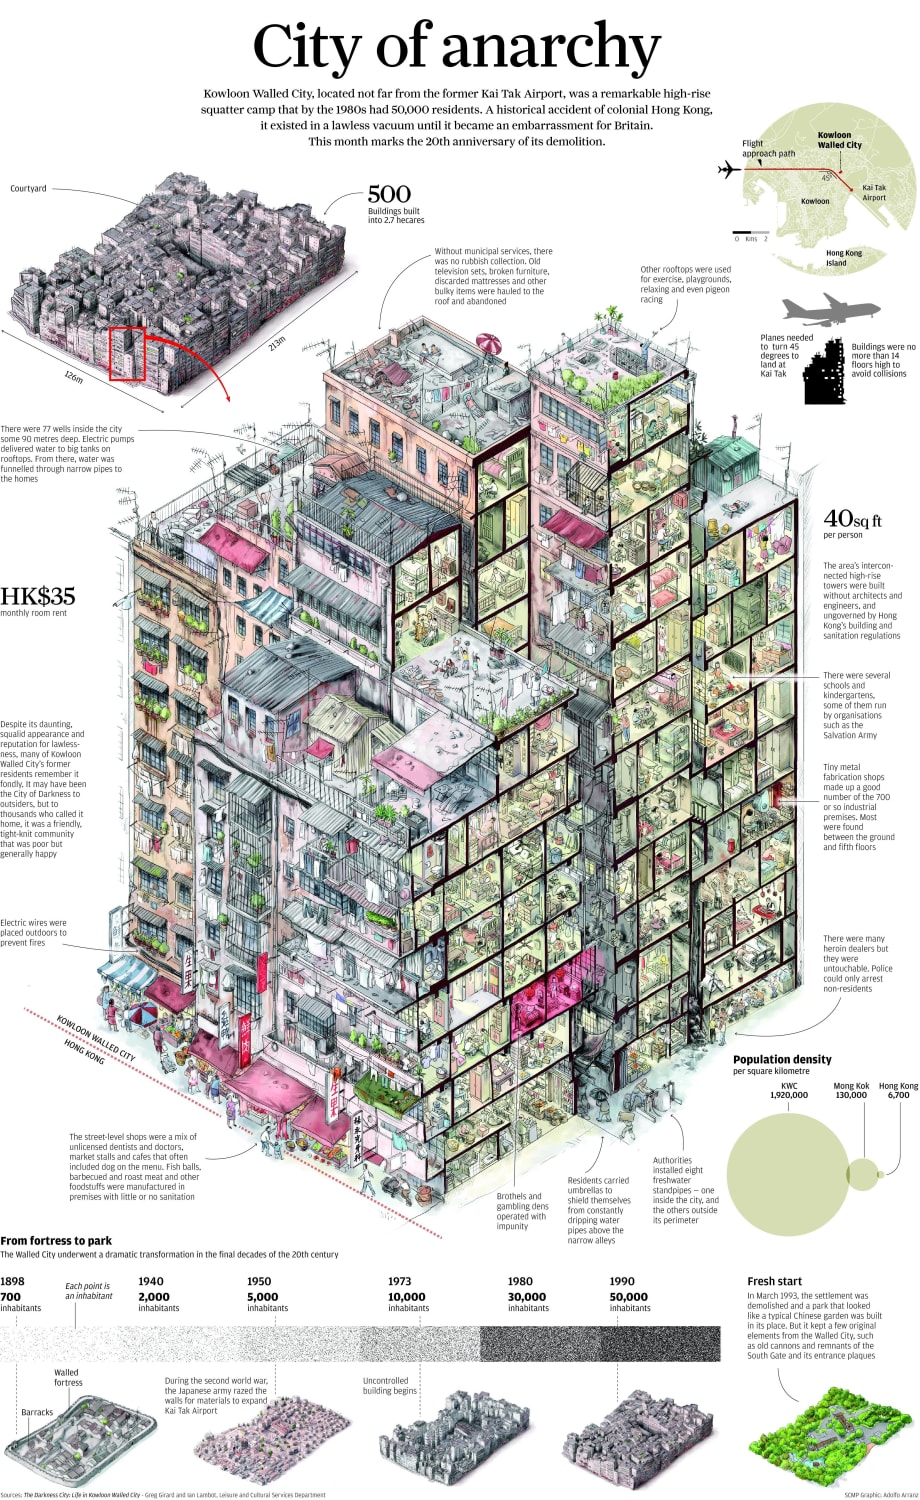 City of Anarchy - A brief history of Kowloon Walled City, the most densely populated building to ever exist